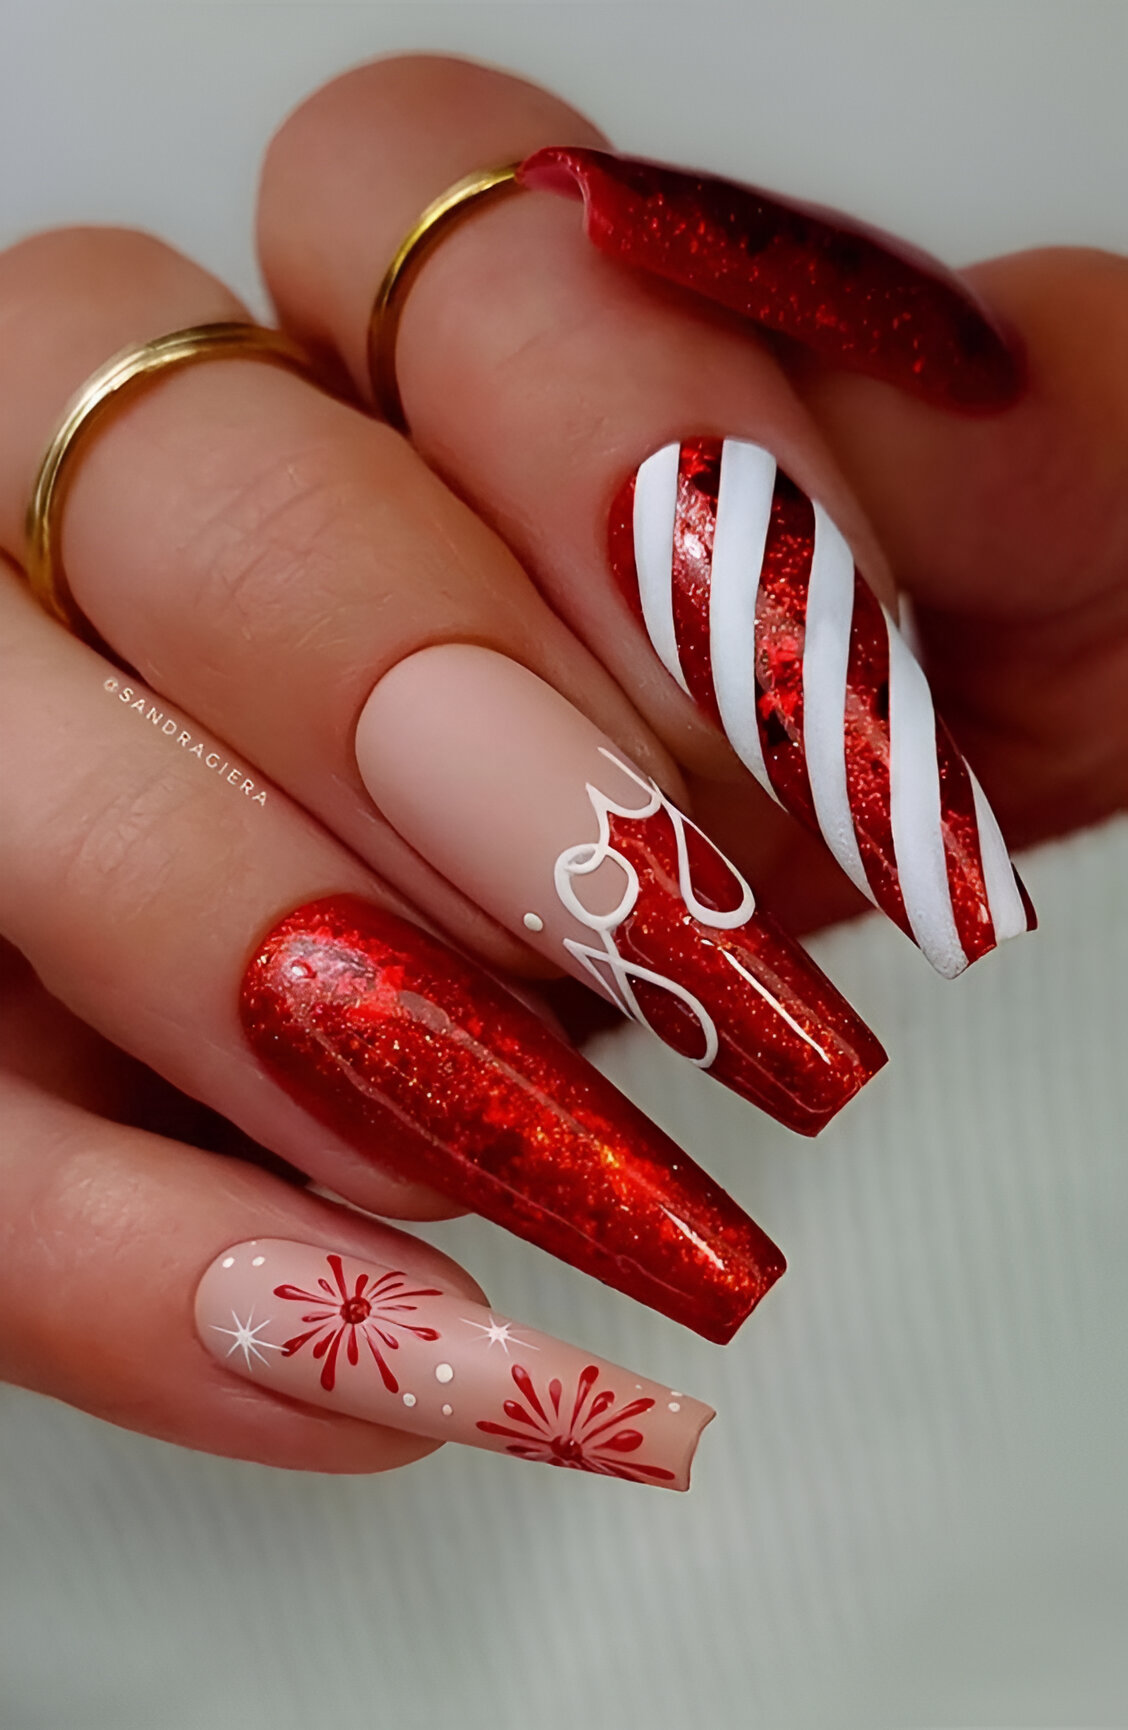 Sparkly Red Christmas Nail Art Designs